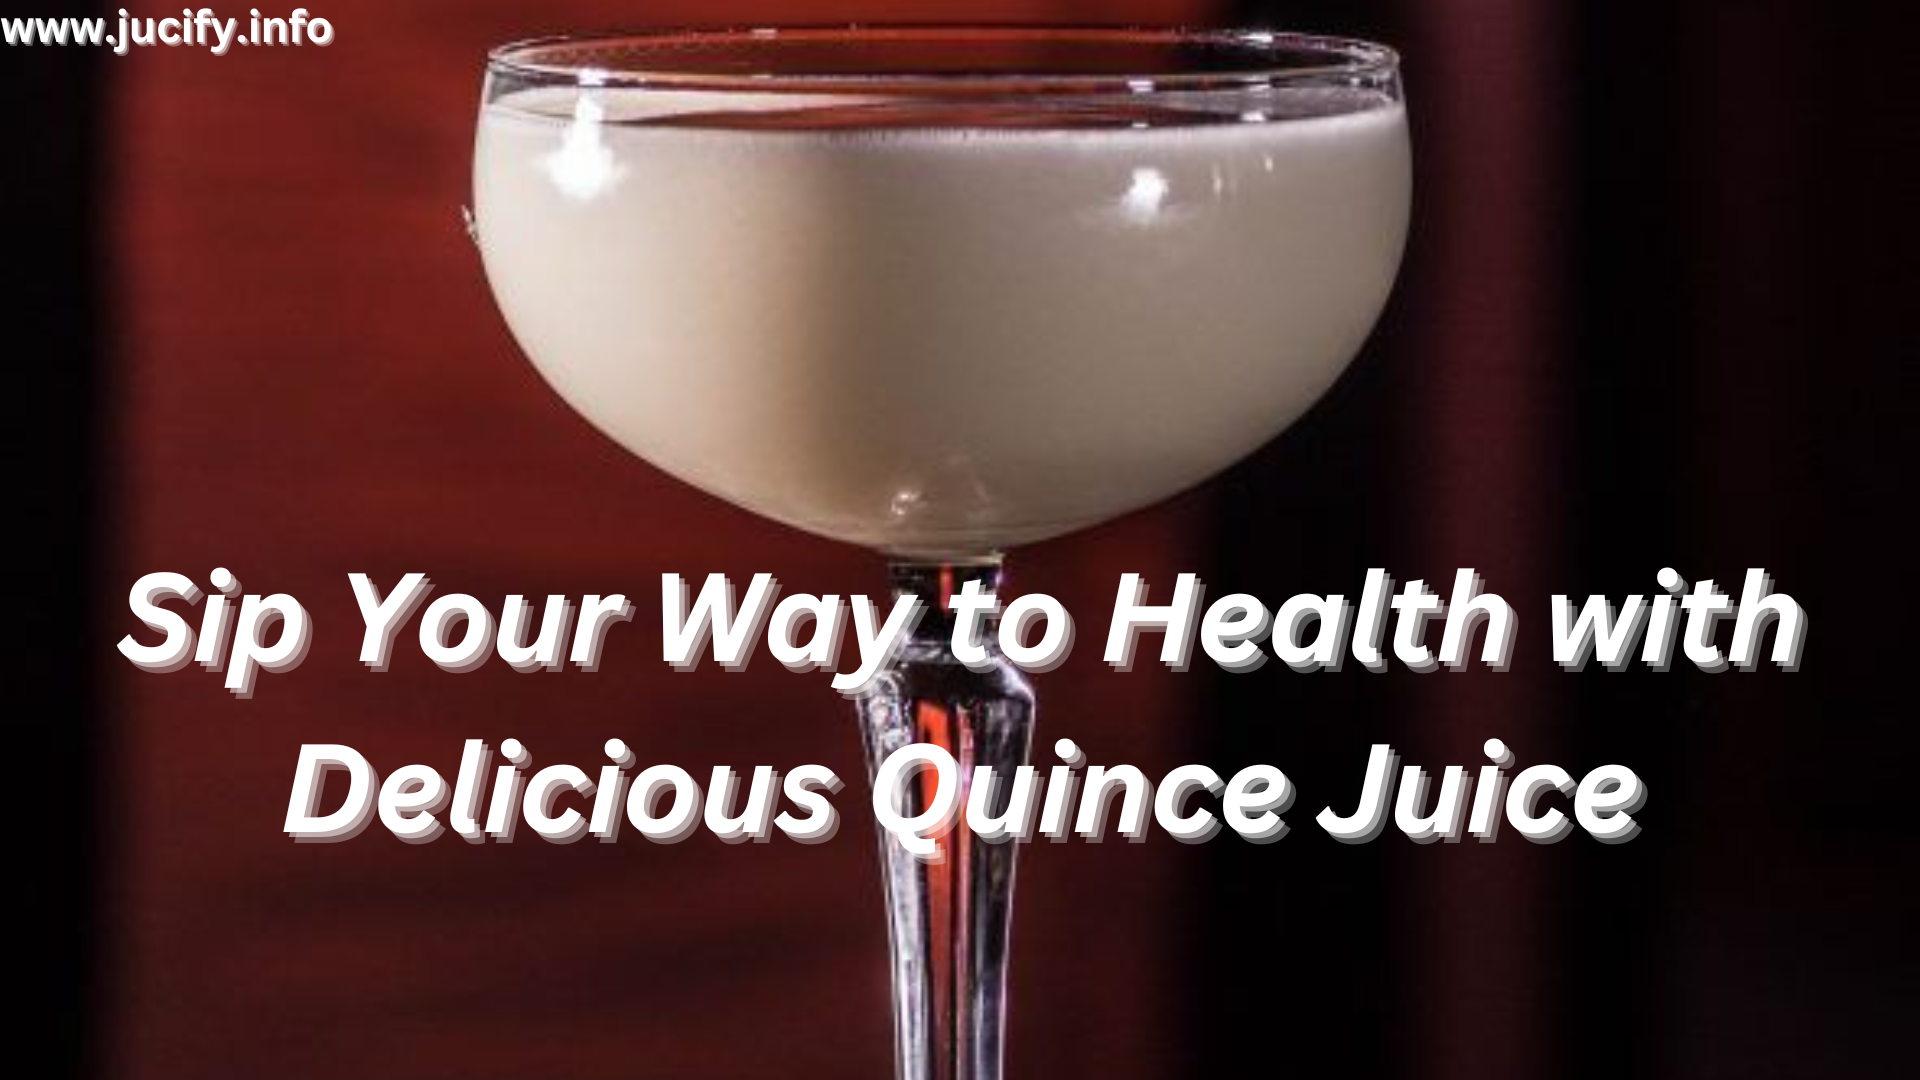 Sip Your Way to Health with Delicious Quince Juice